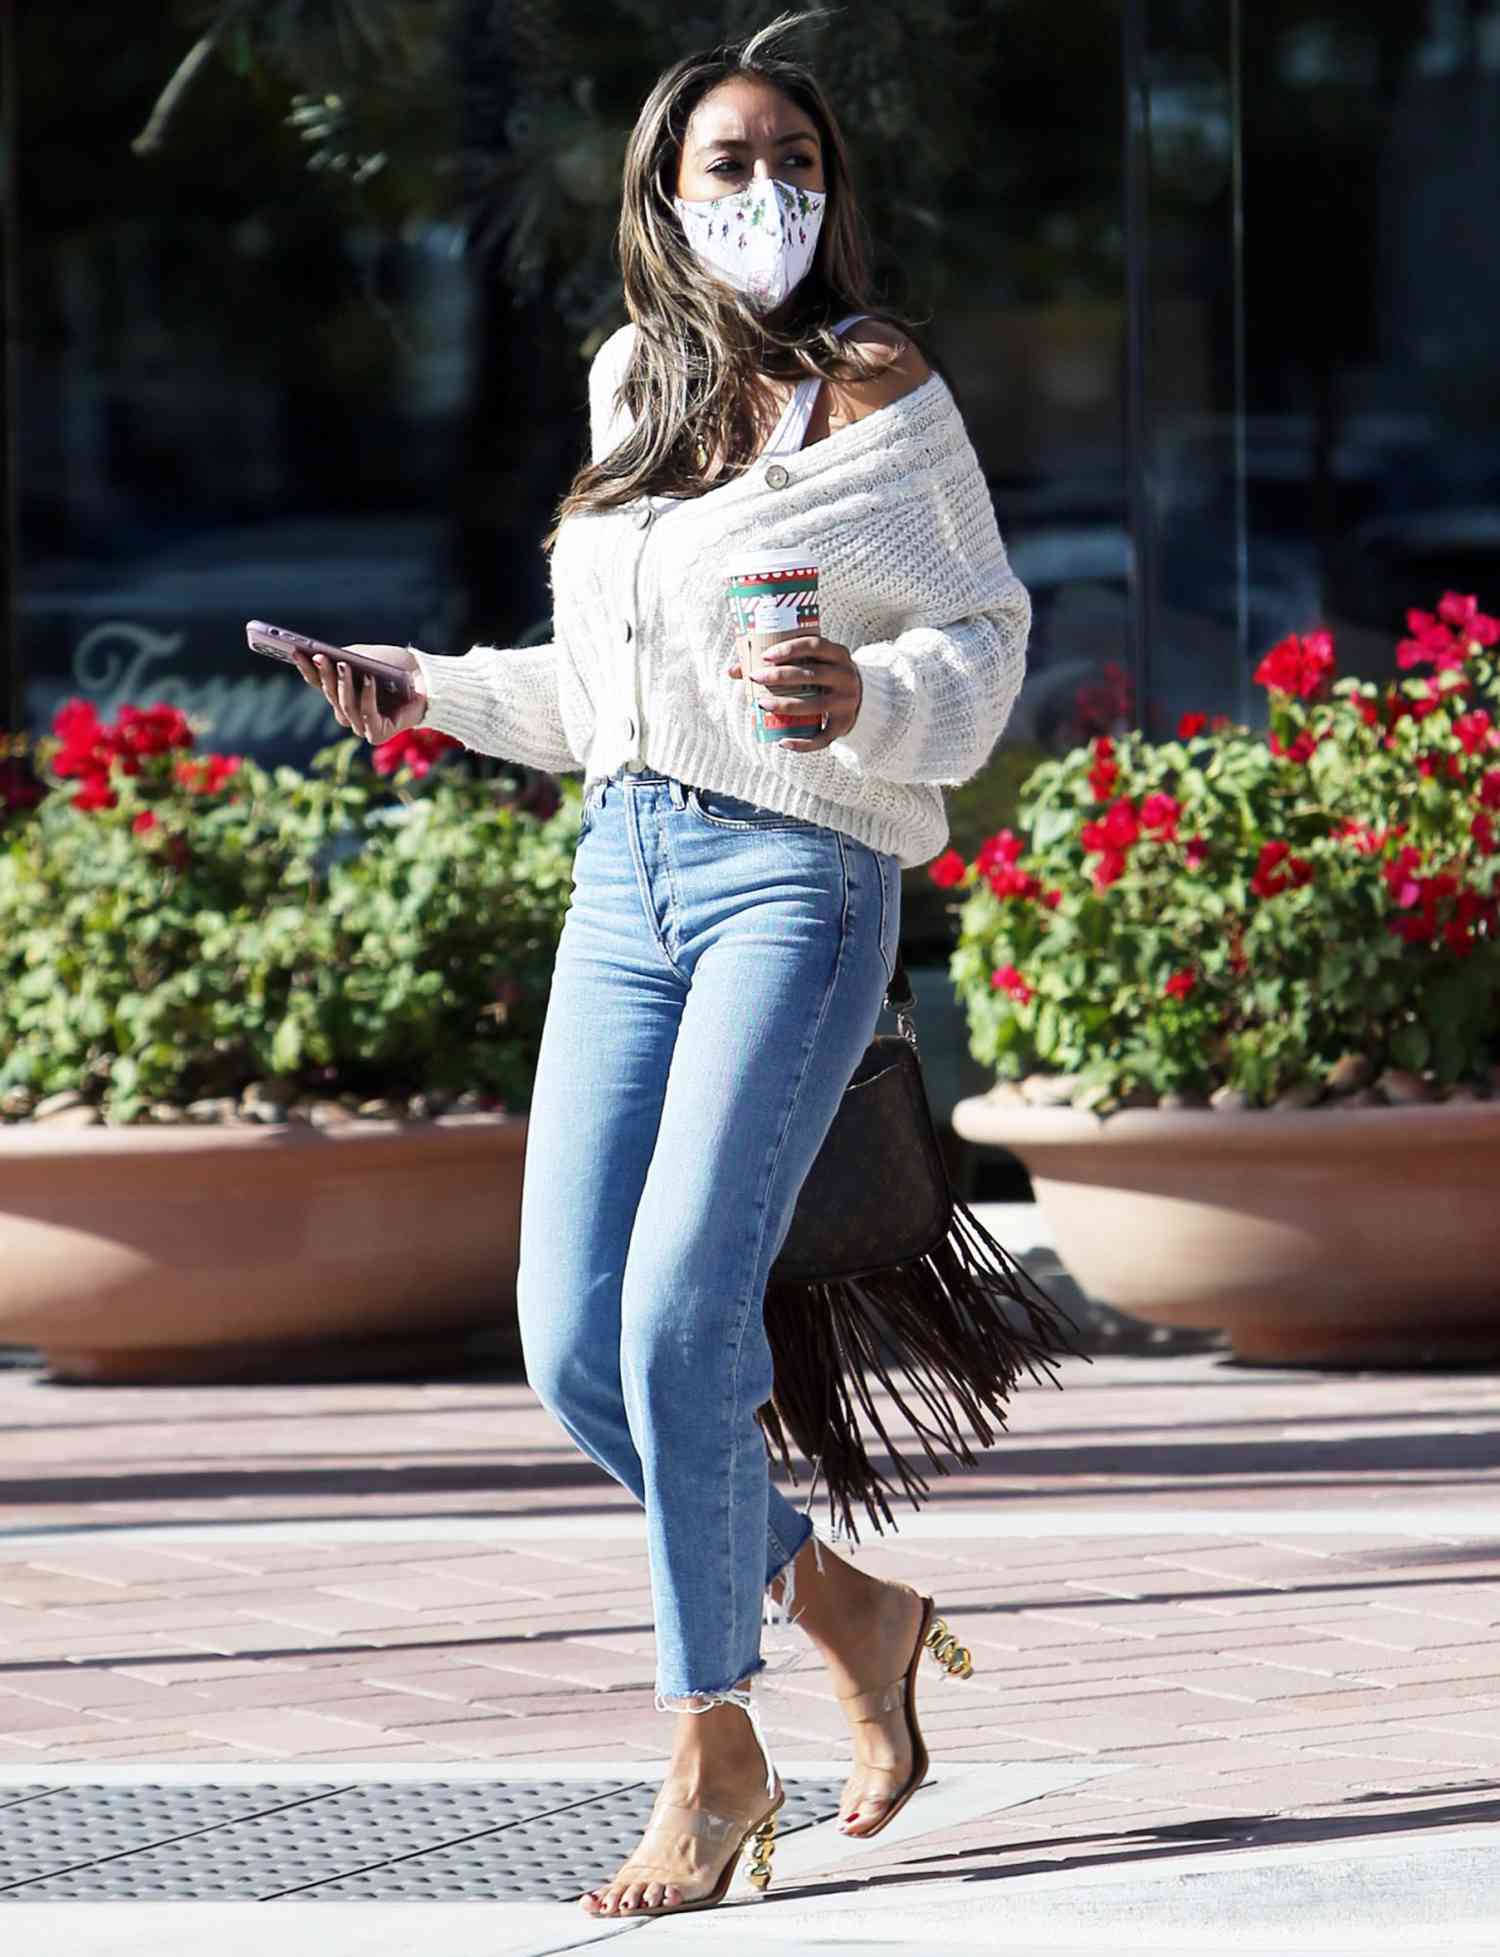 Bachelorette Tayshia Adams Grabs Coffee And Hits A McDonalds Drive-Thru During A Busy Day Of Errands On Countdown To Dating Show Finale.